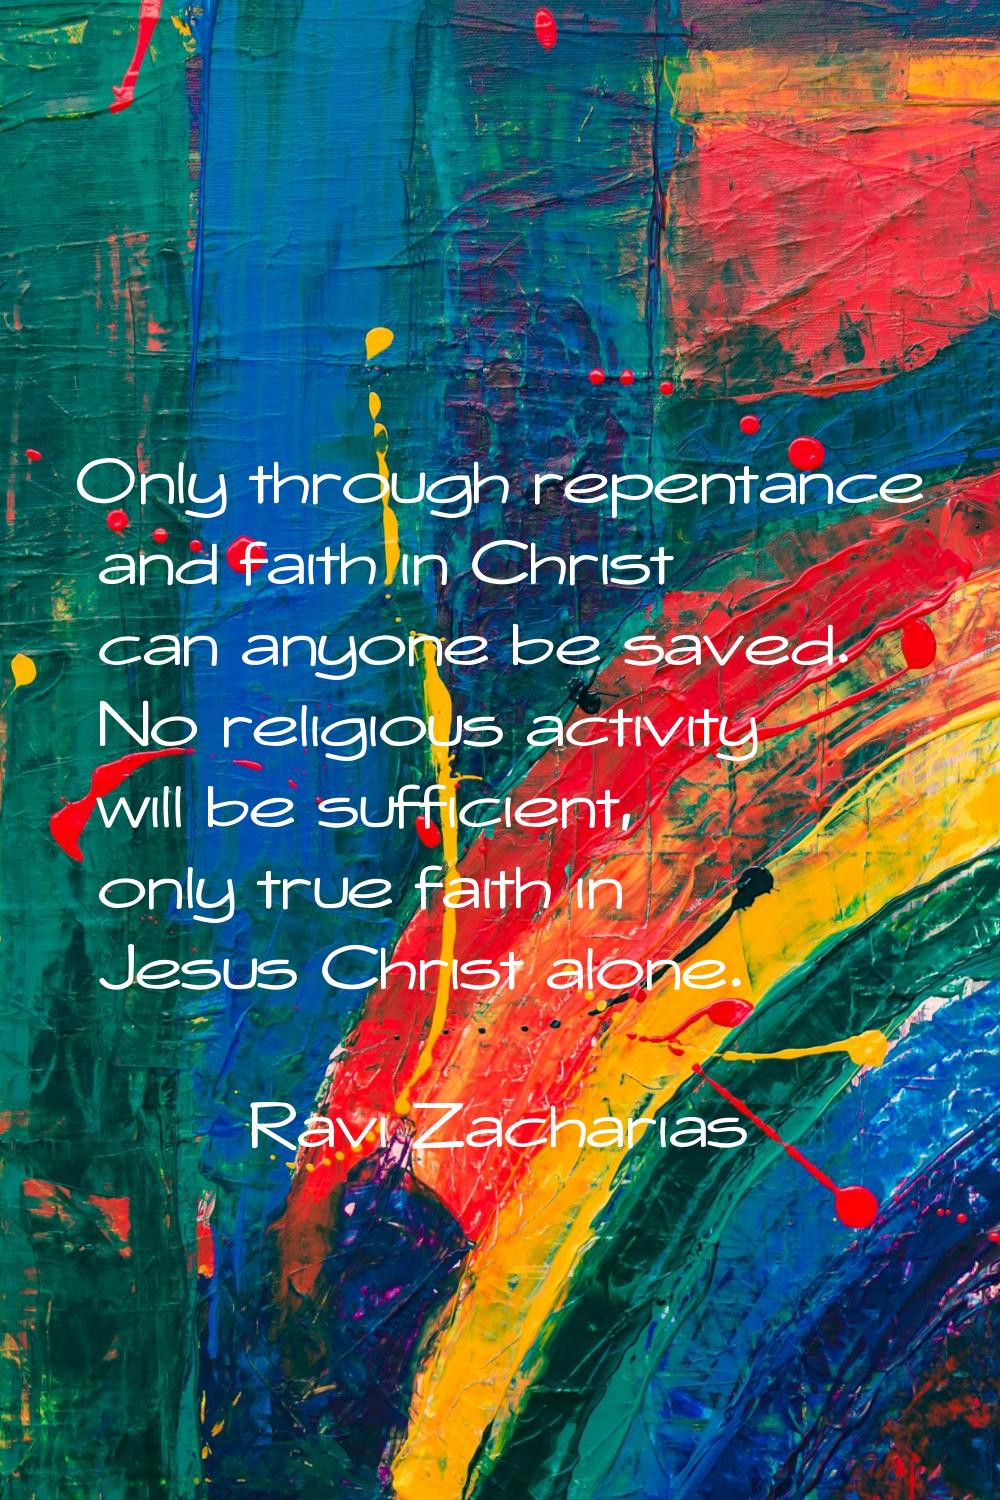 Only through repentance and faith in Christ can anyone be saved. No religious activity will be suff